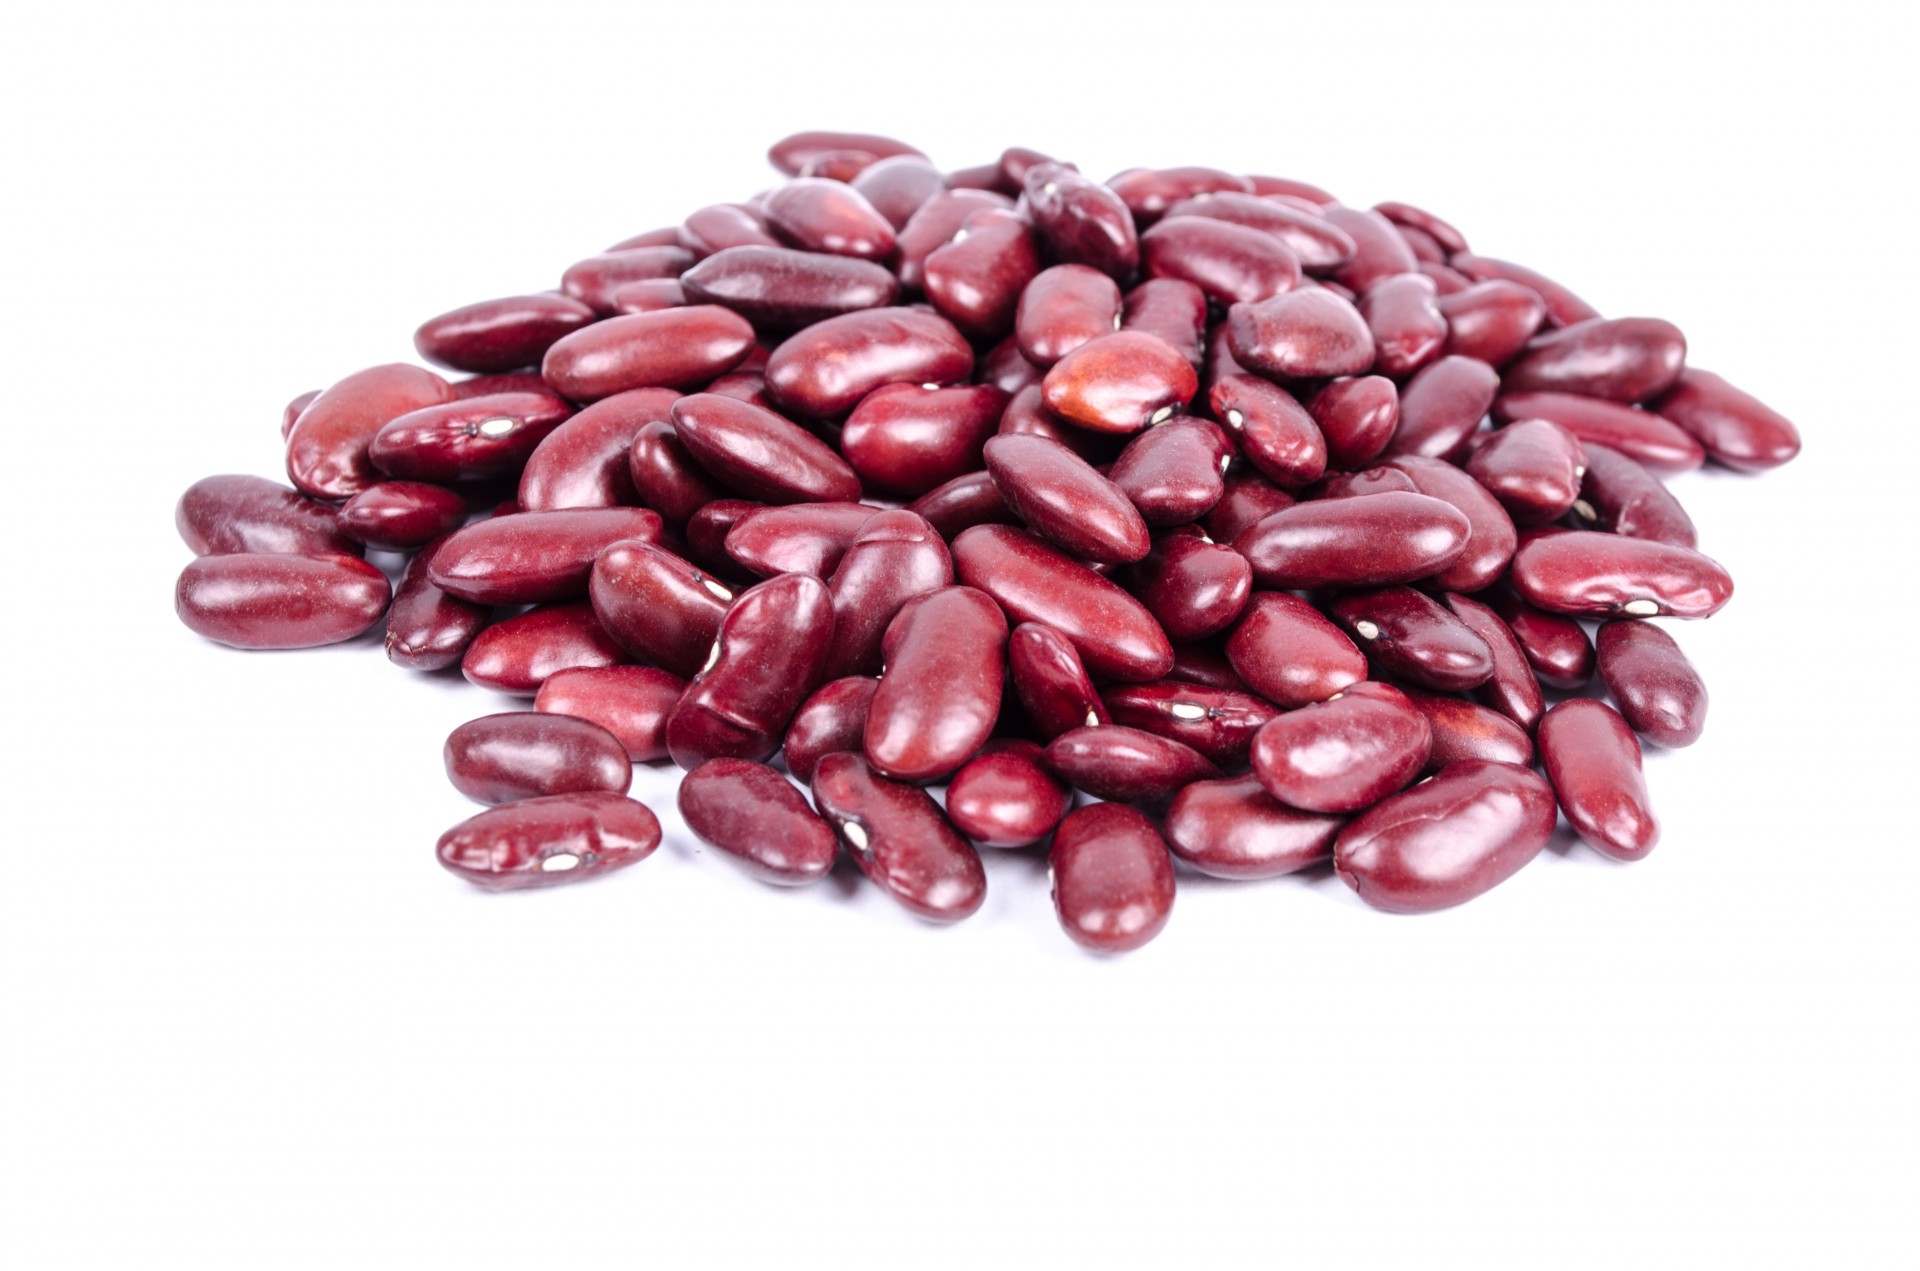 Red kidney beans isolated on white background